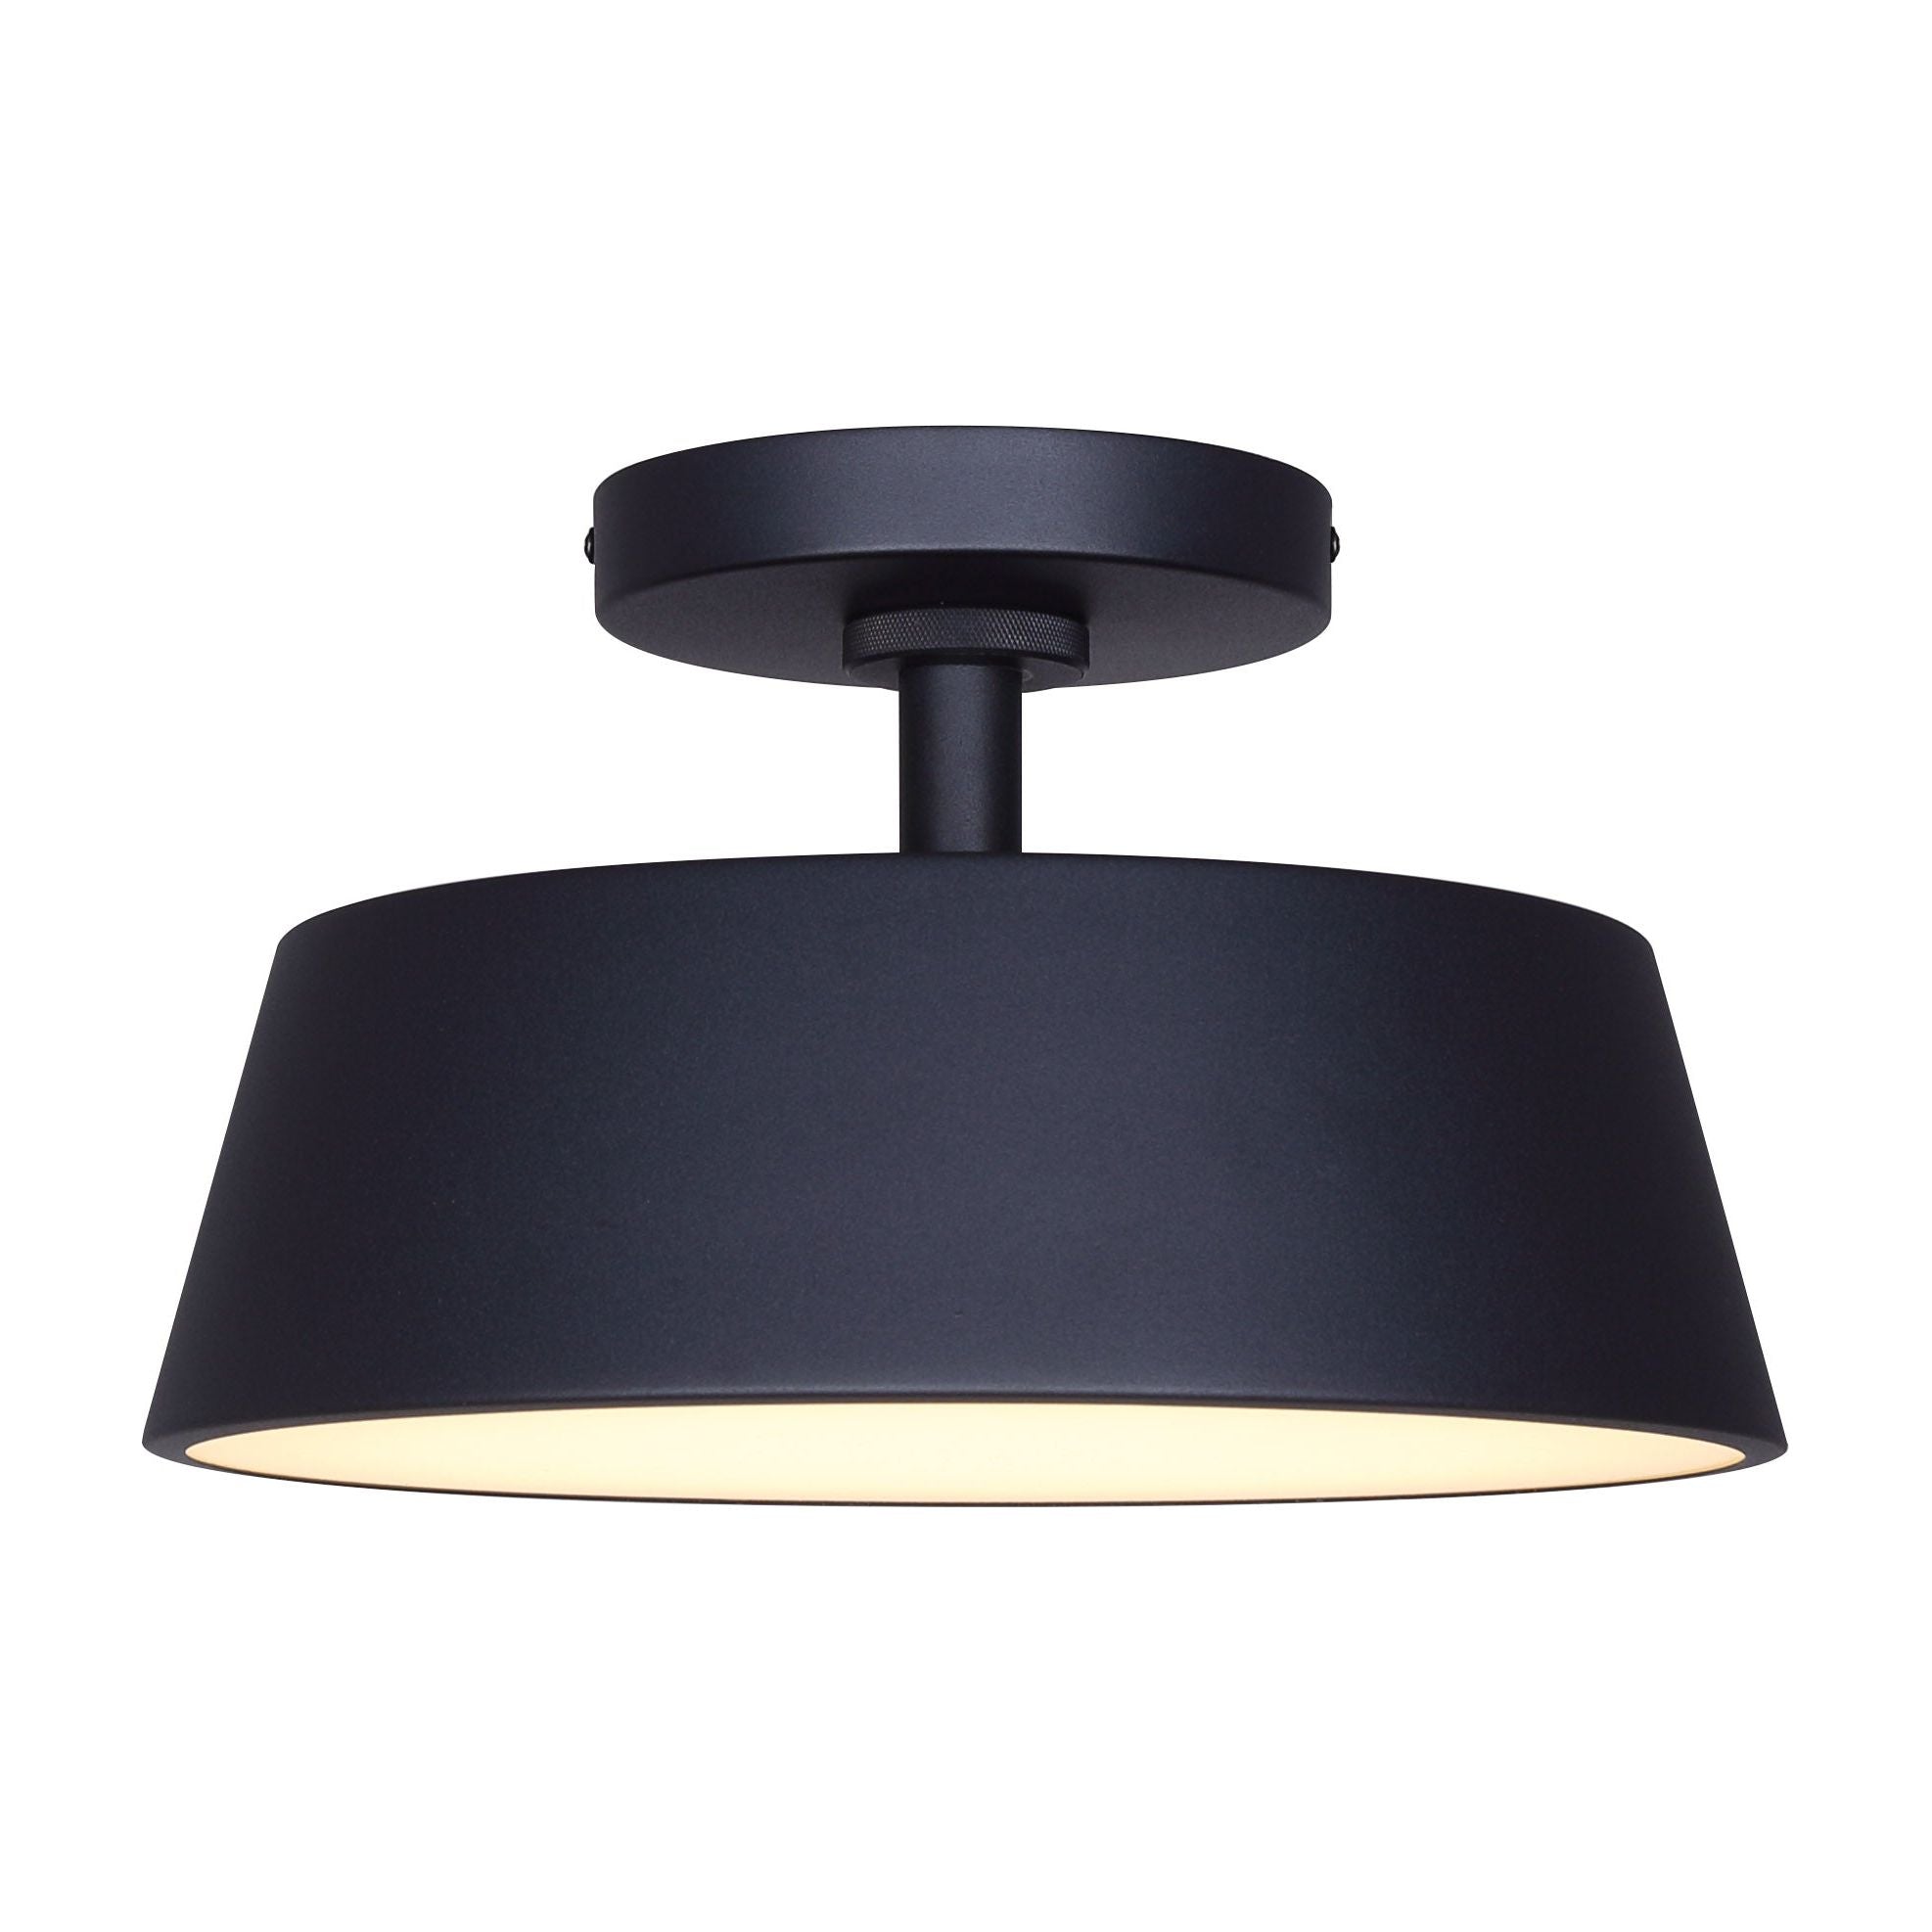 Baxley LED Outdoor Ceiling Light